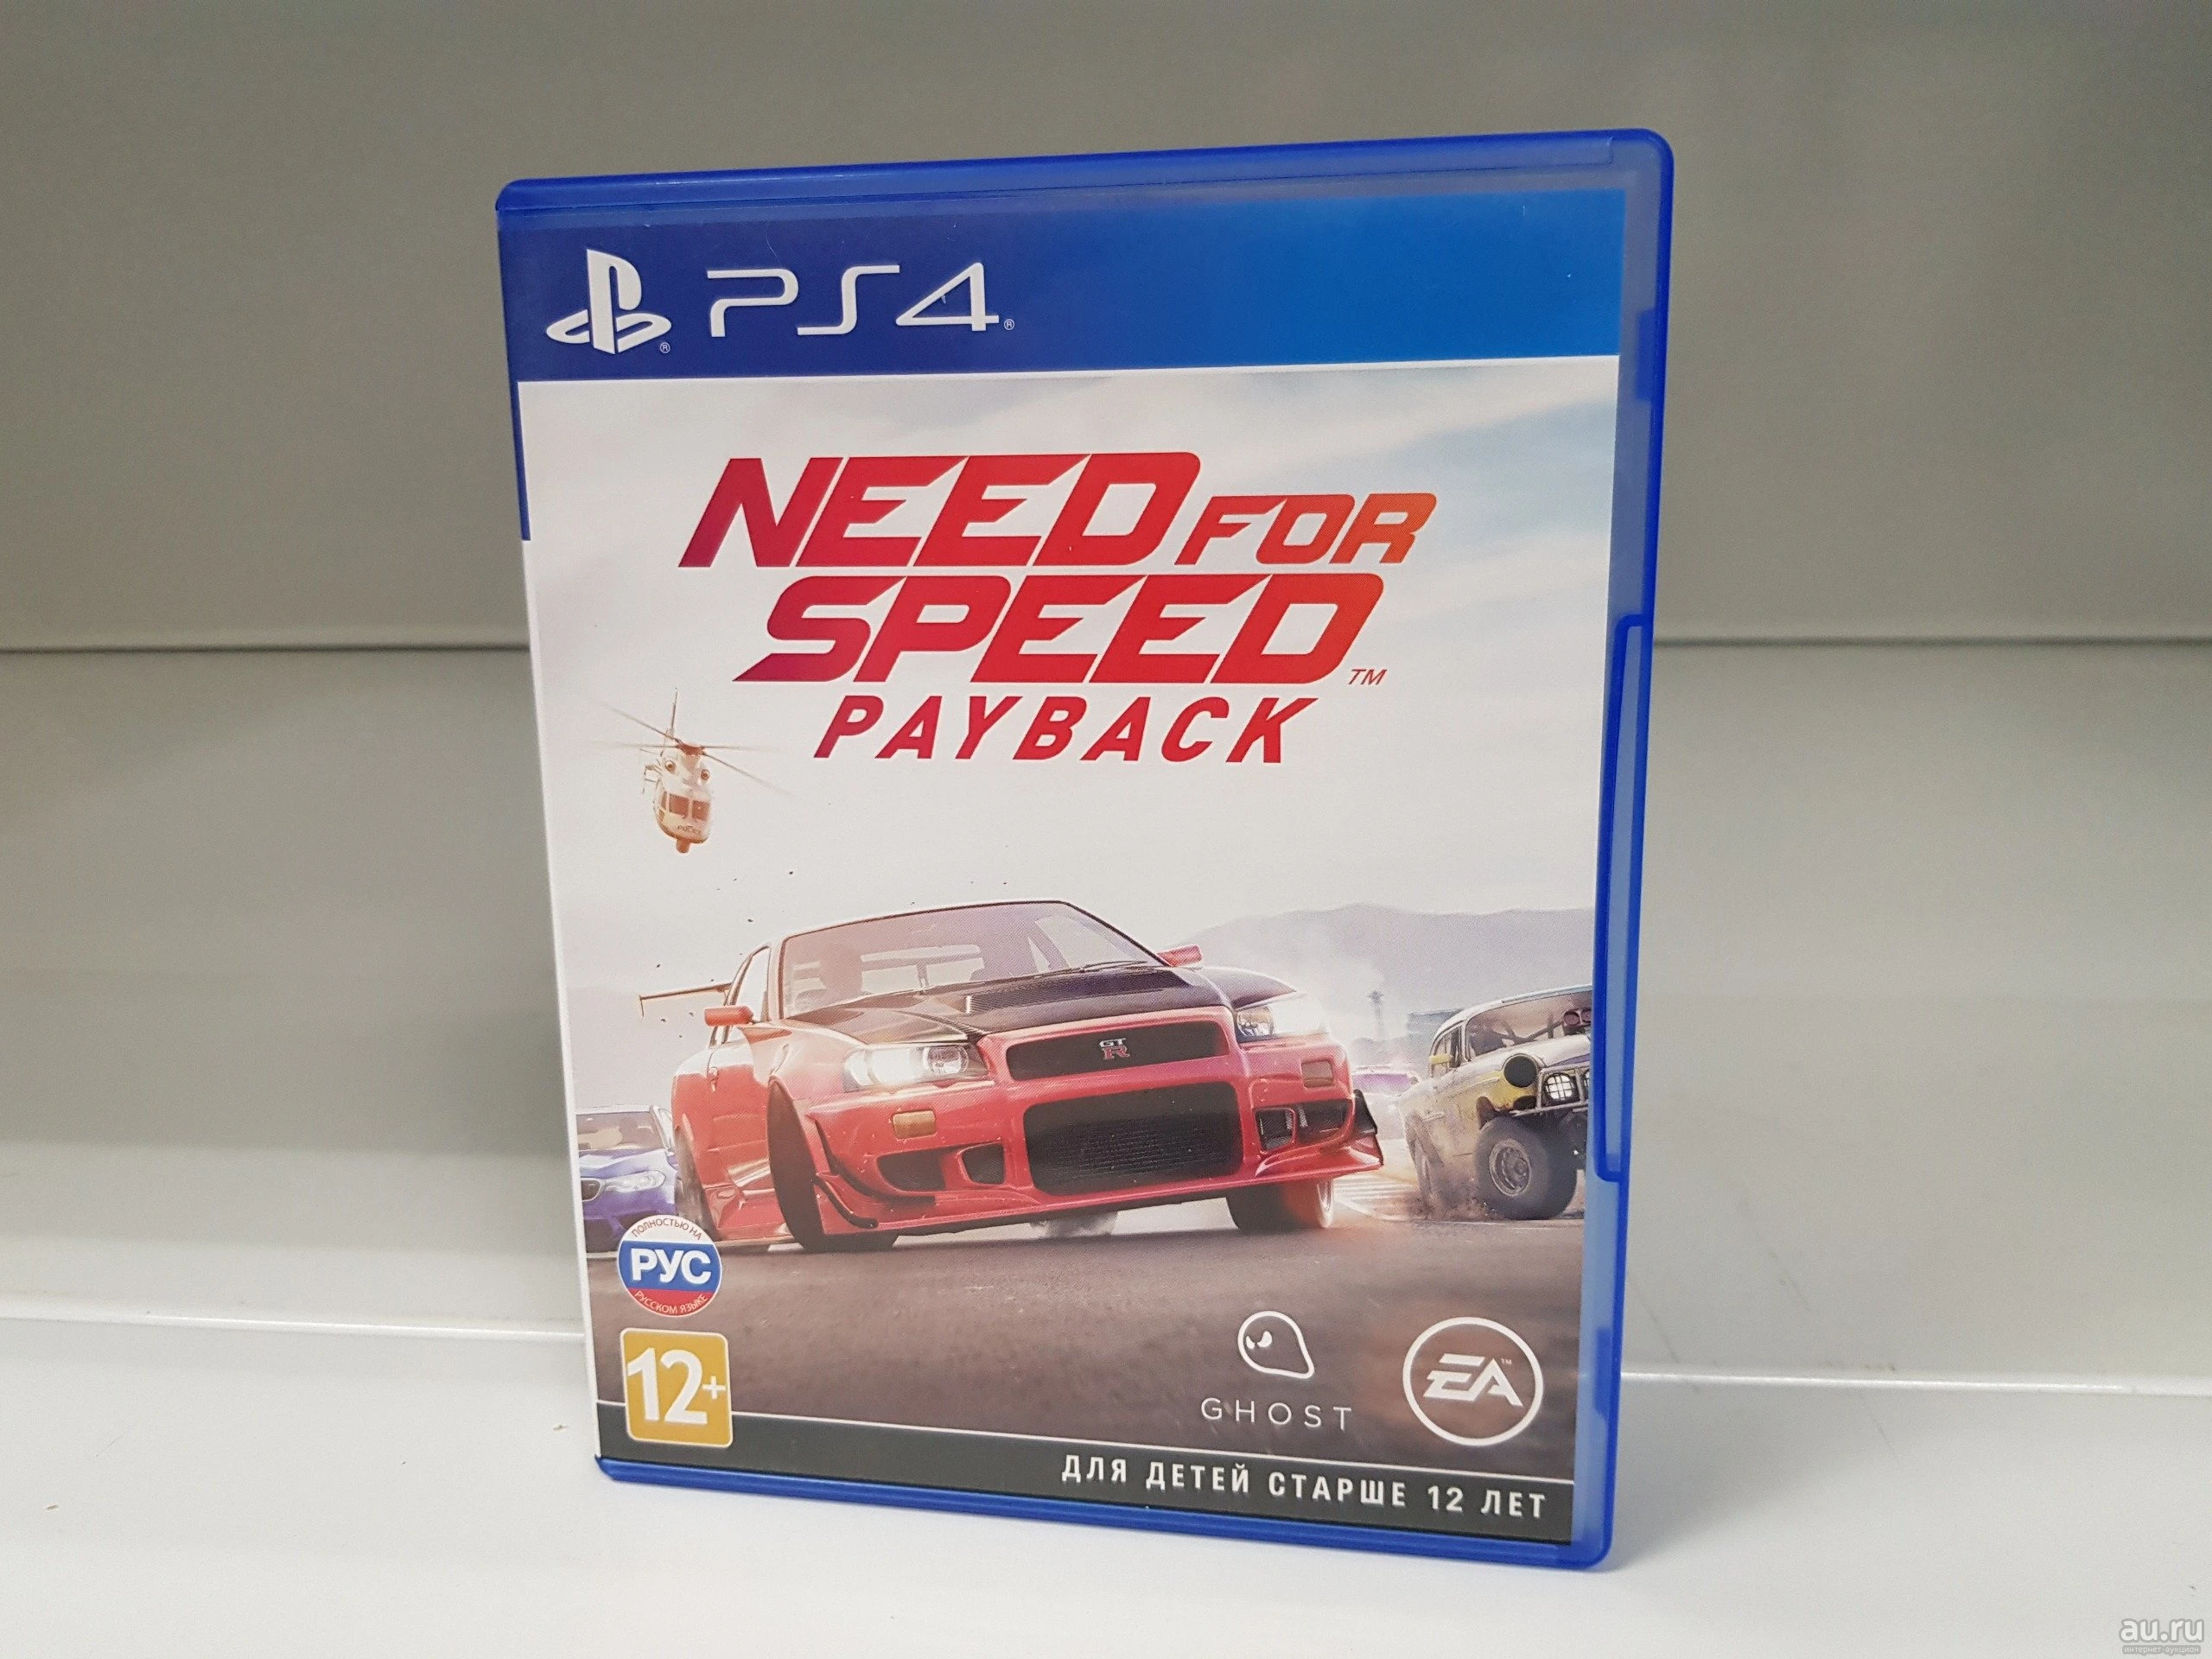 Nfs payback ps4. Need for Speed Payback пс4. NFS Payback ps4 диск. Need for Speed диск на ПС 4. Need for Speed Payback (ps4).